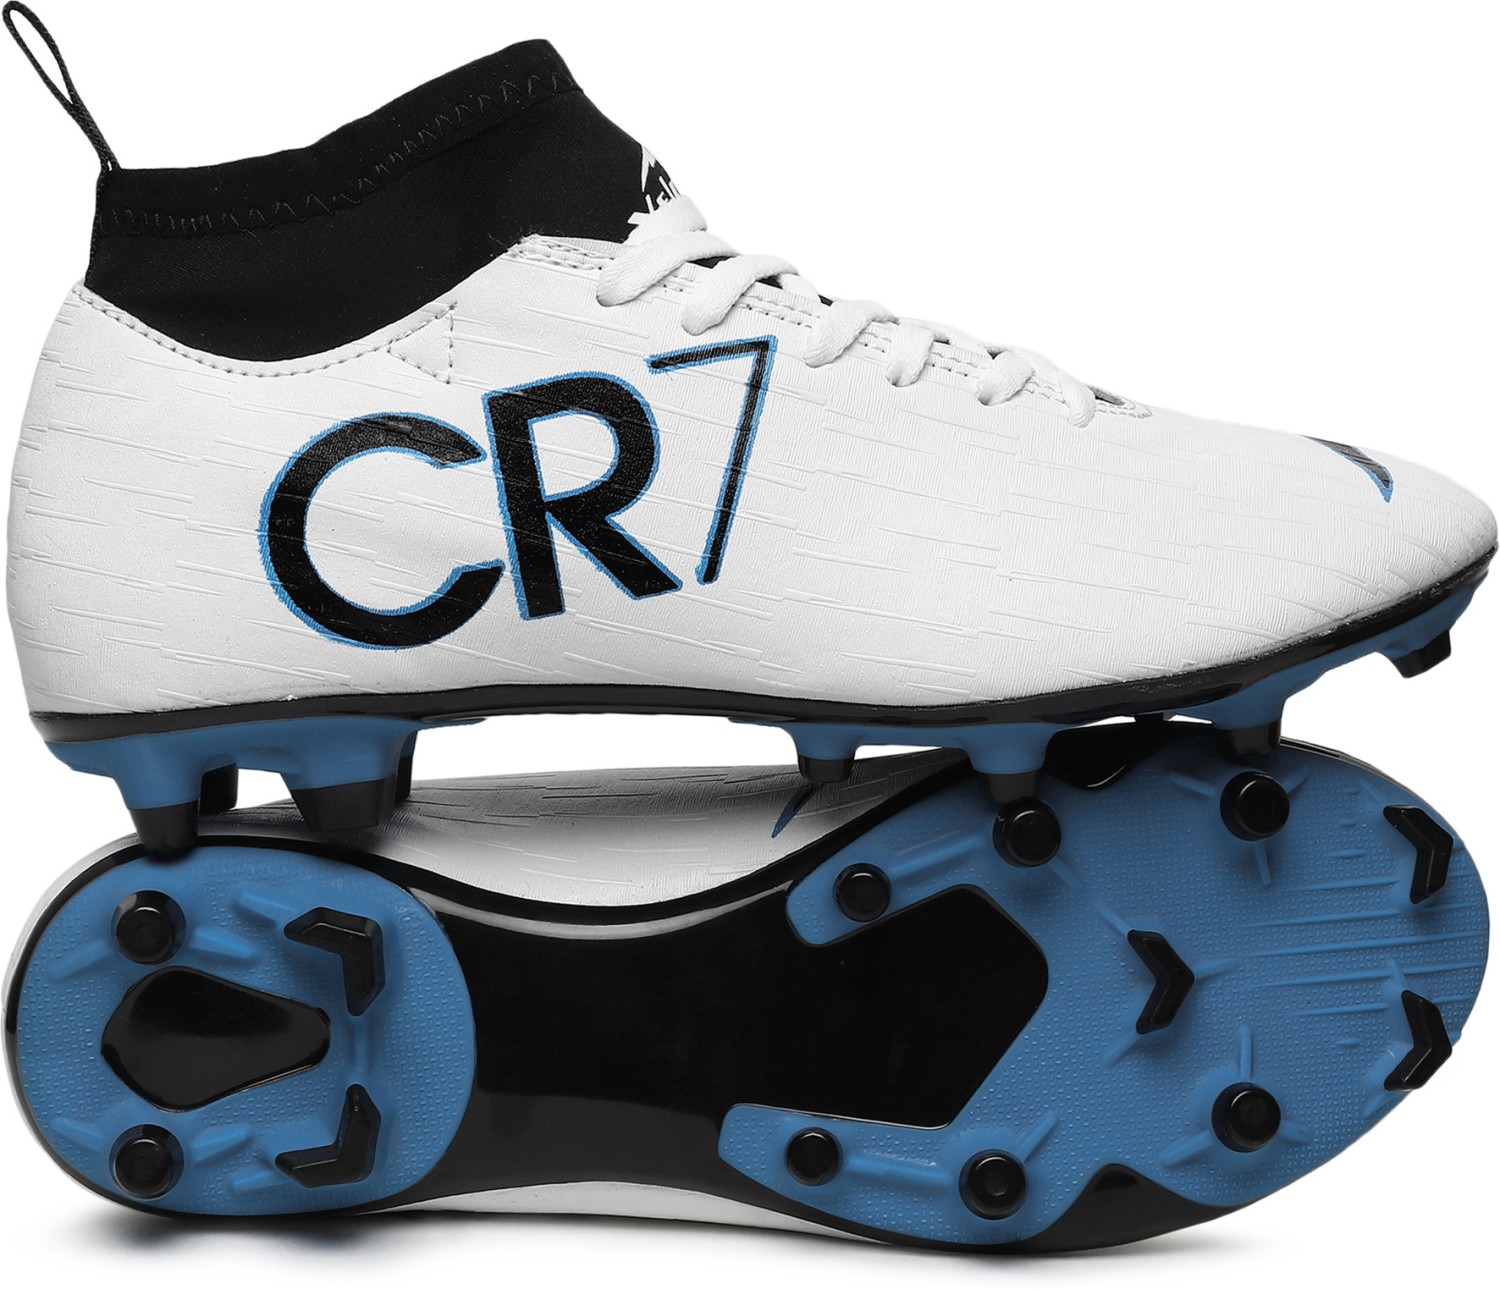 CR7 Juventus Ankle Sport Football Studs Shoes Football, 49% OFF